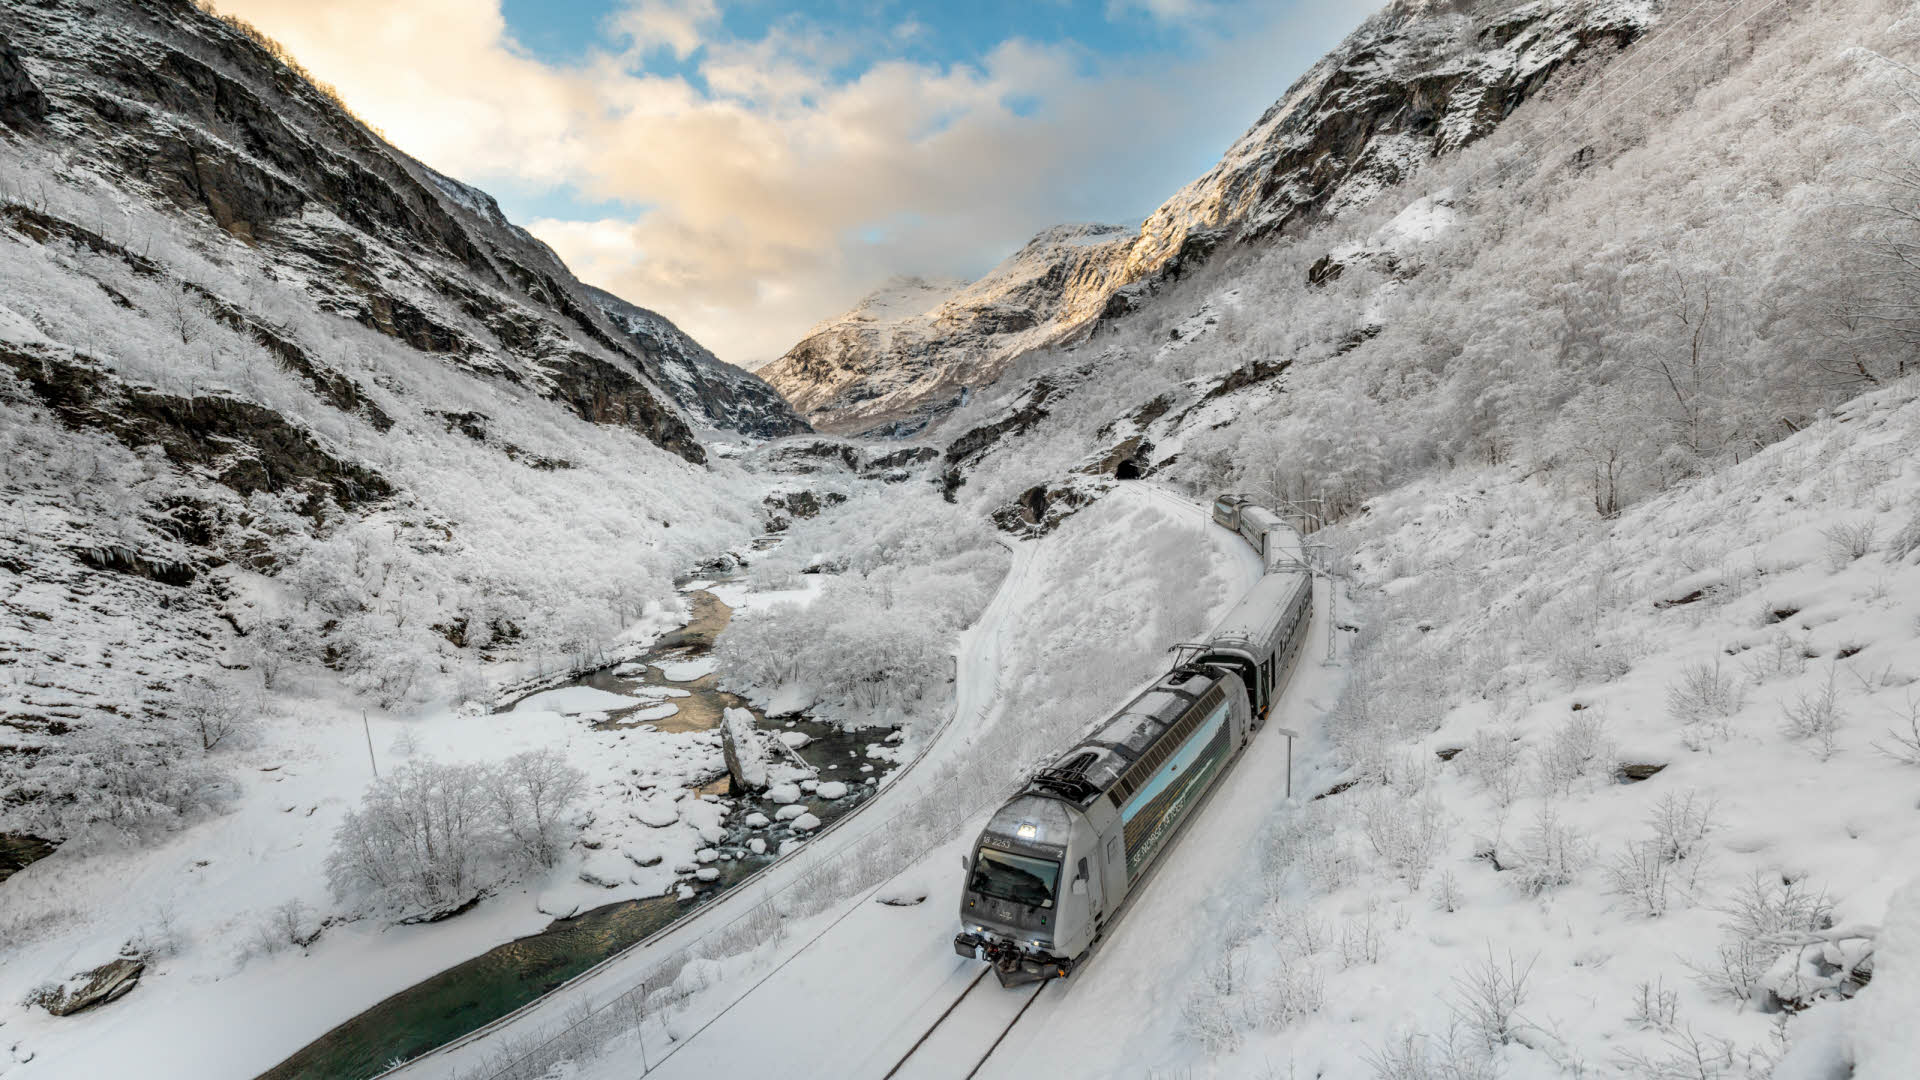 The Flåm Railway coming down the Flåm valley in winter with snow covered tracks and mountains.